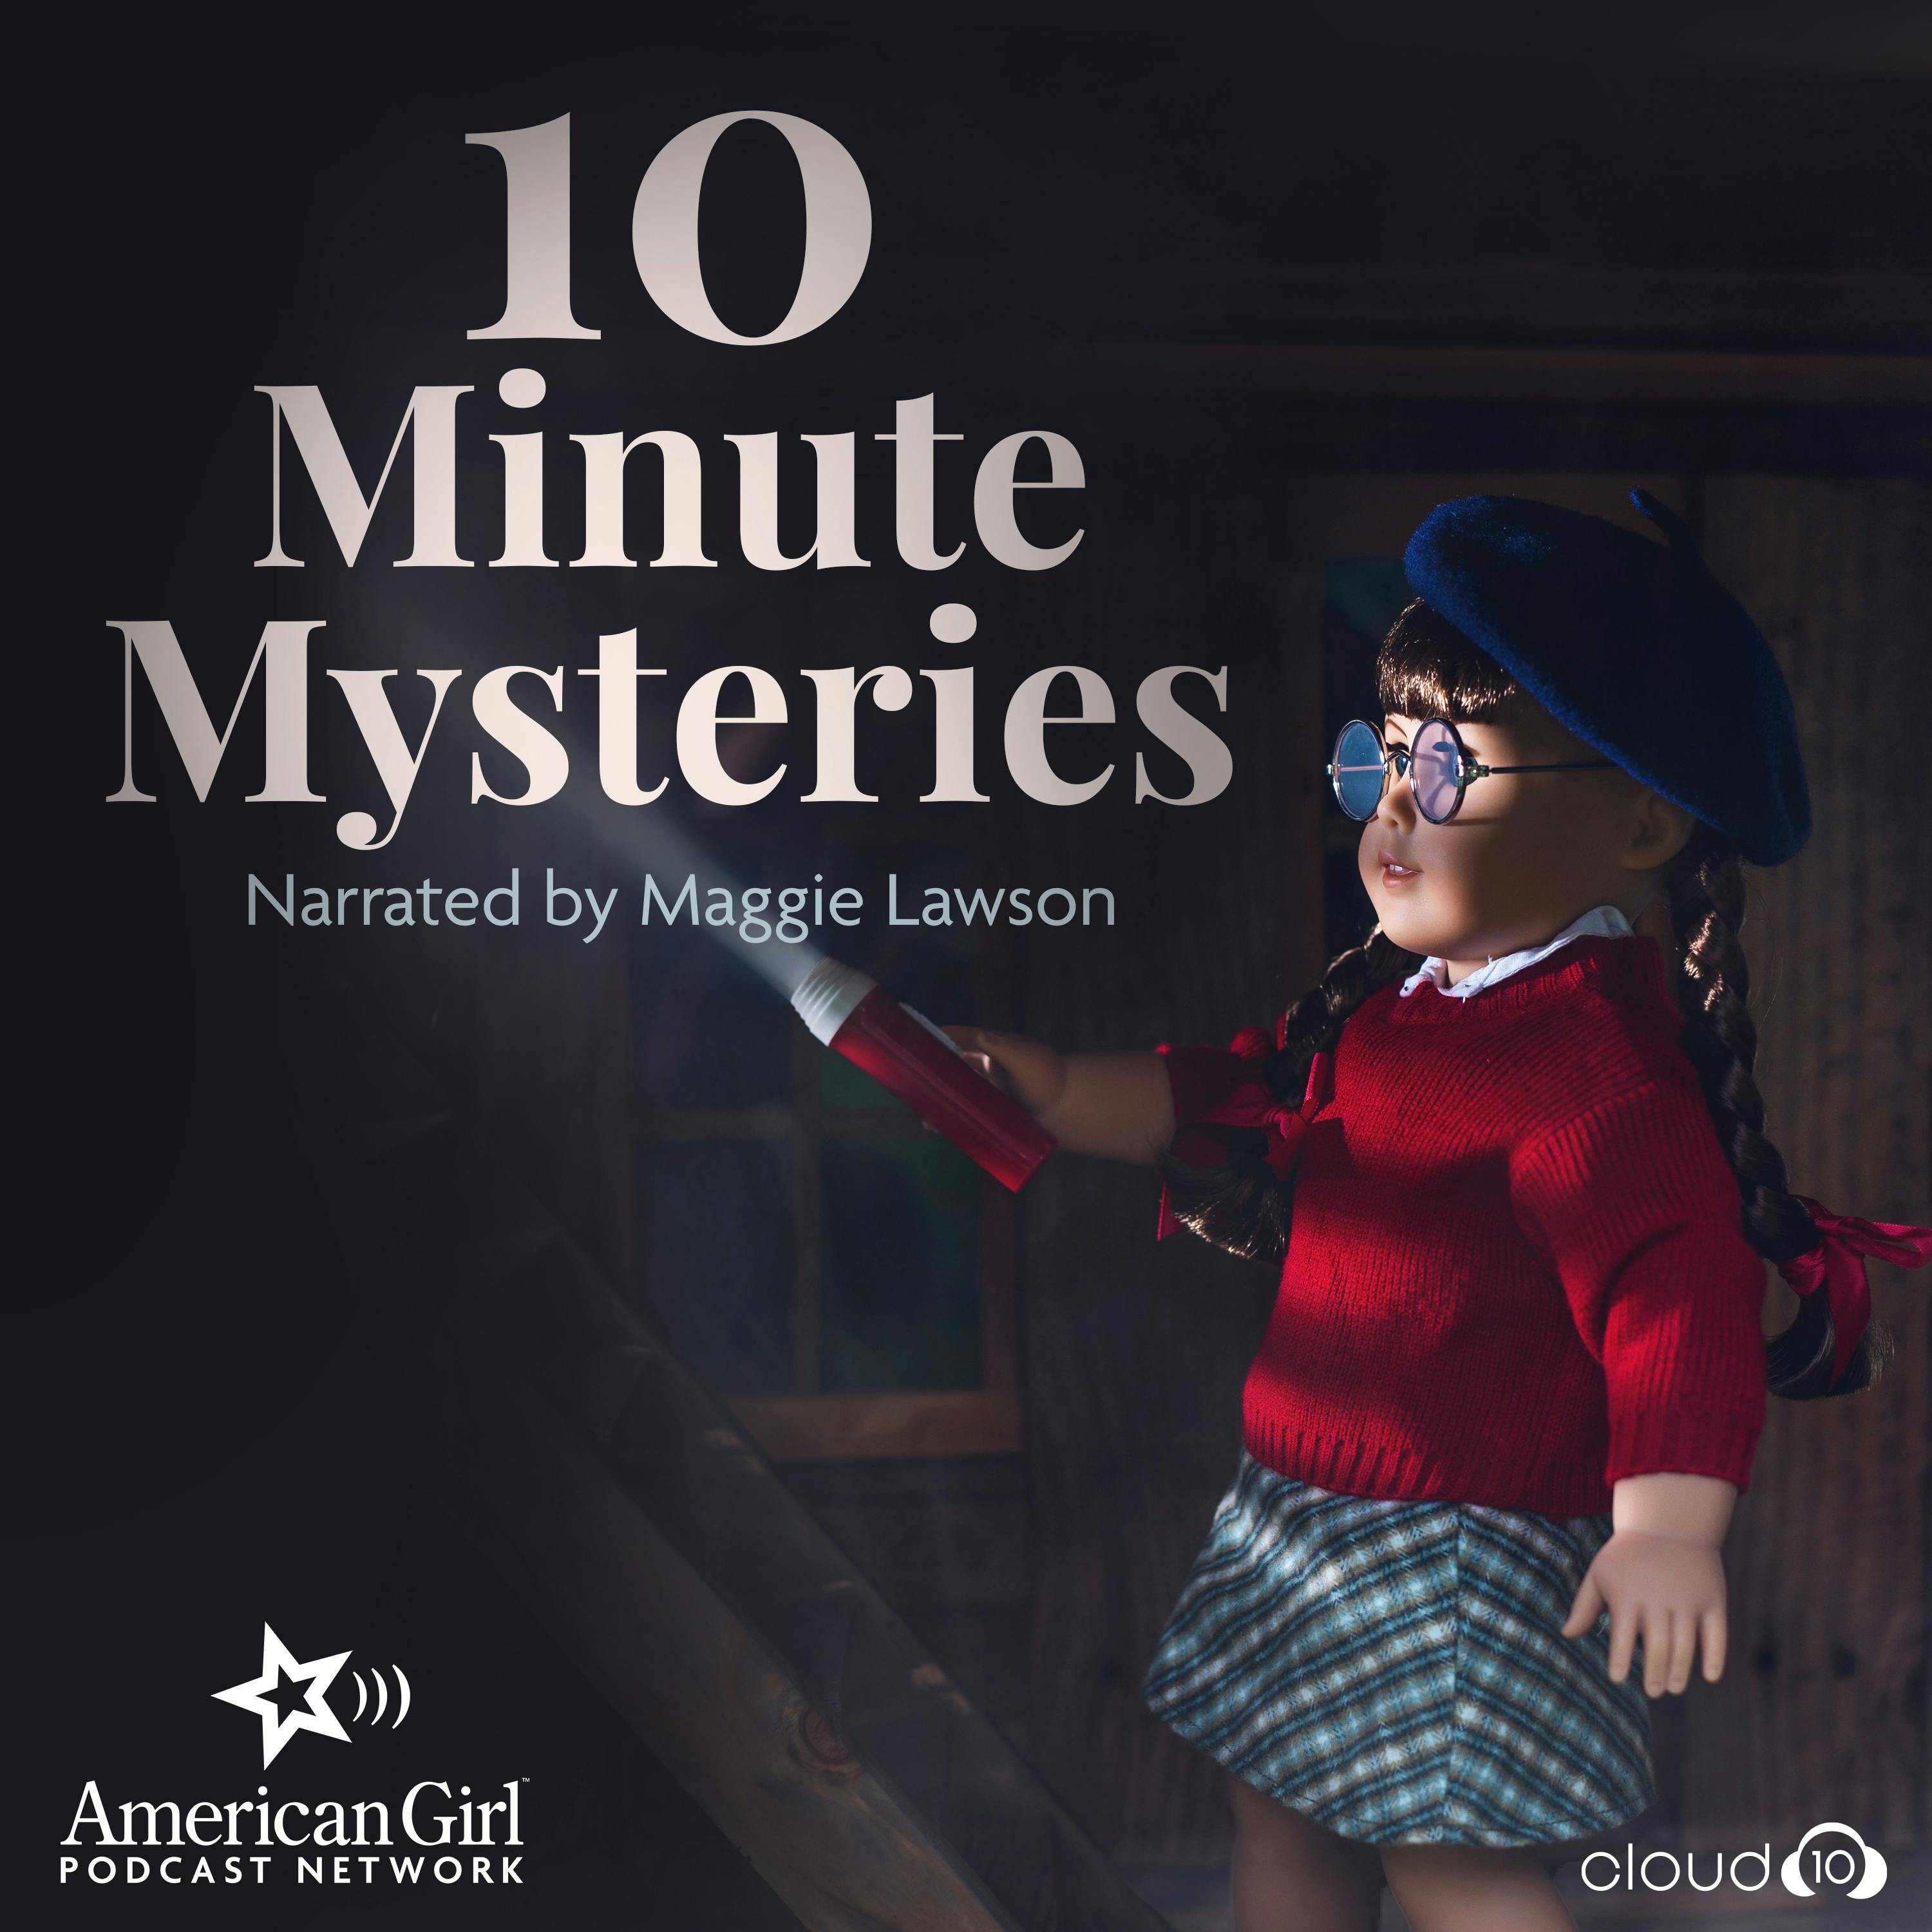 Introducing: American Girl 10 Minute Mysteries